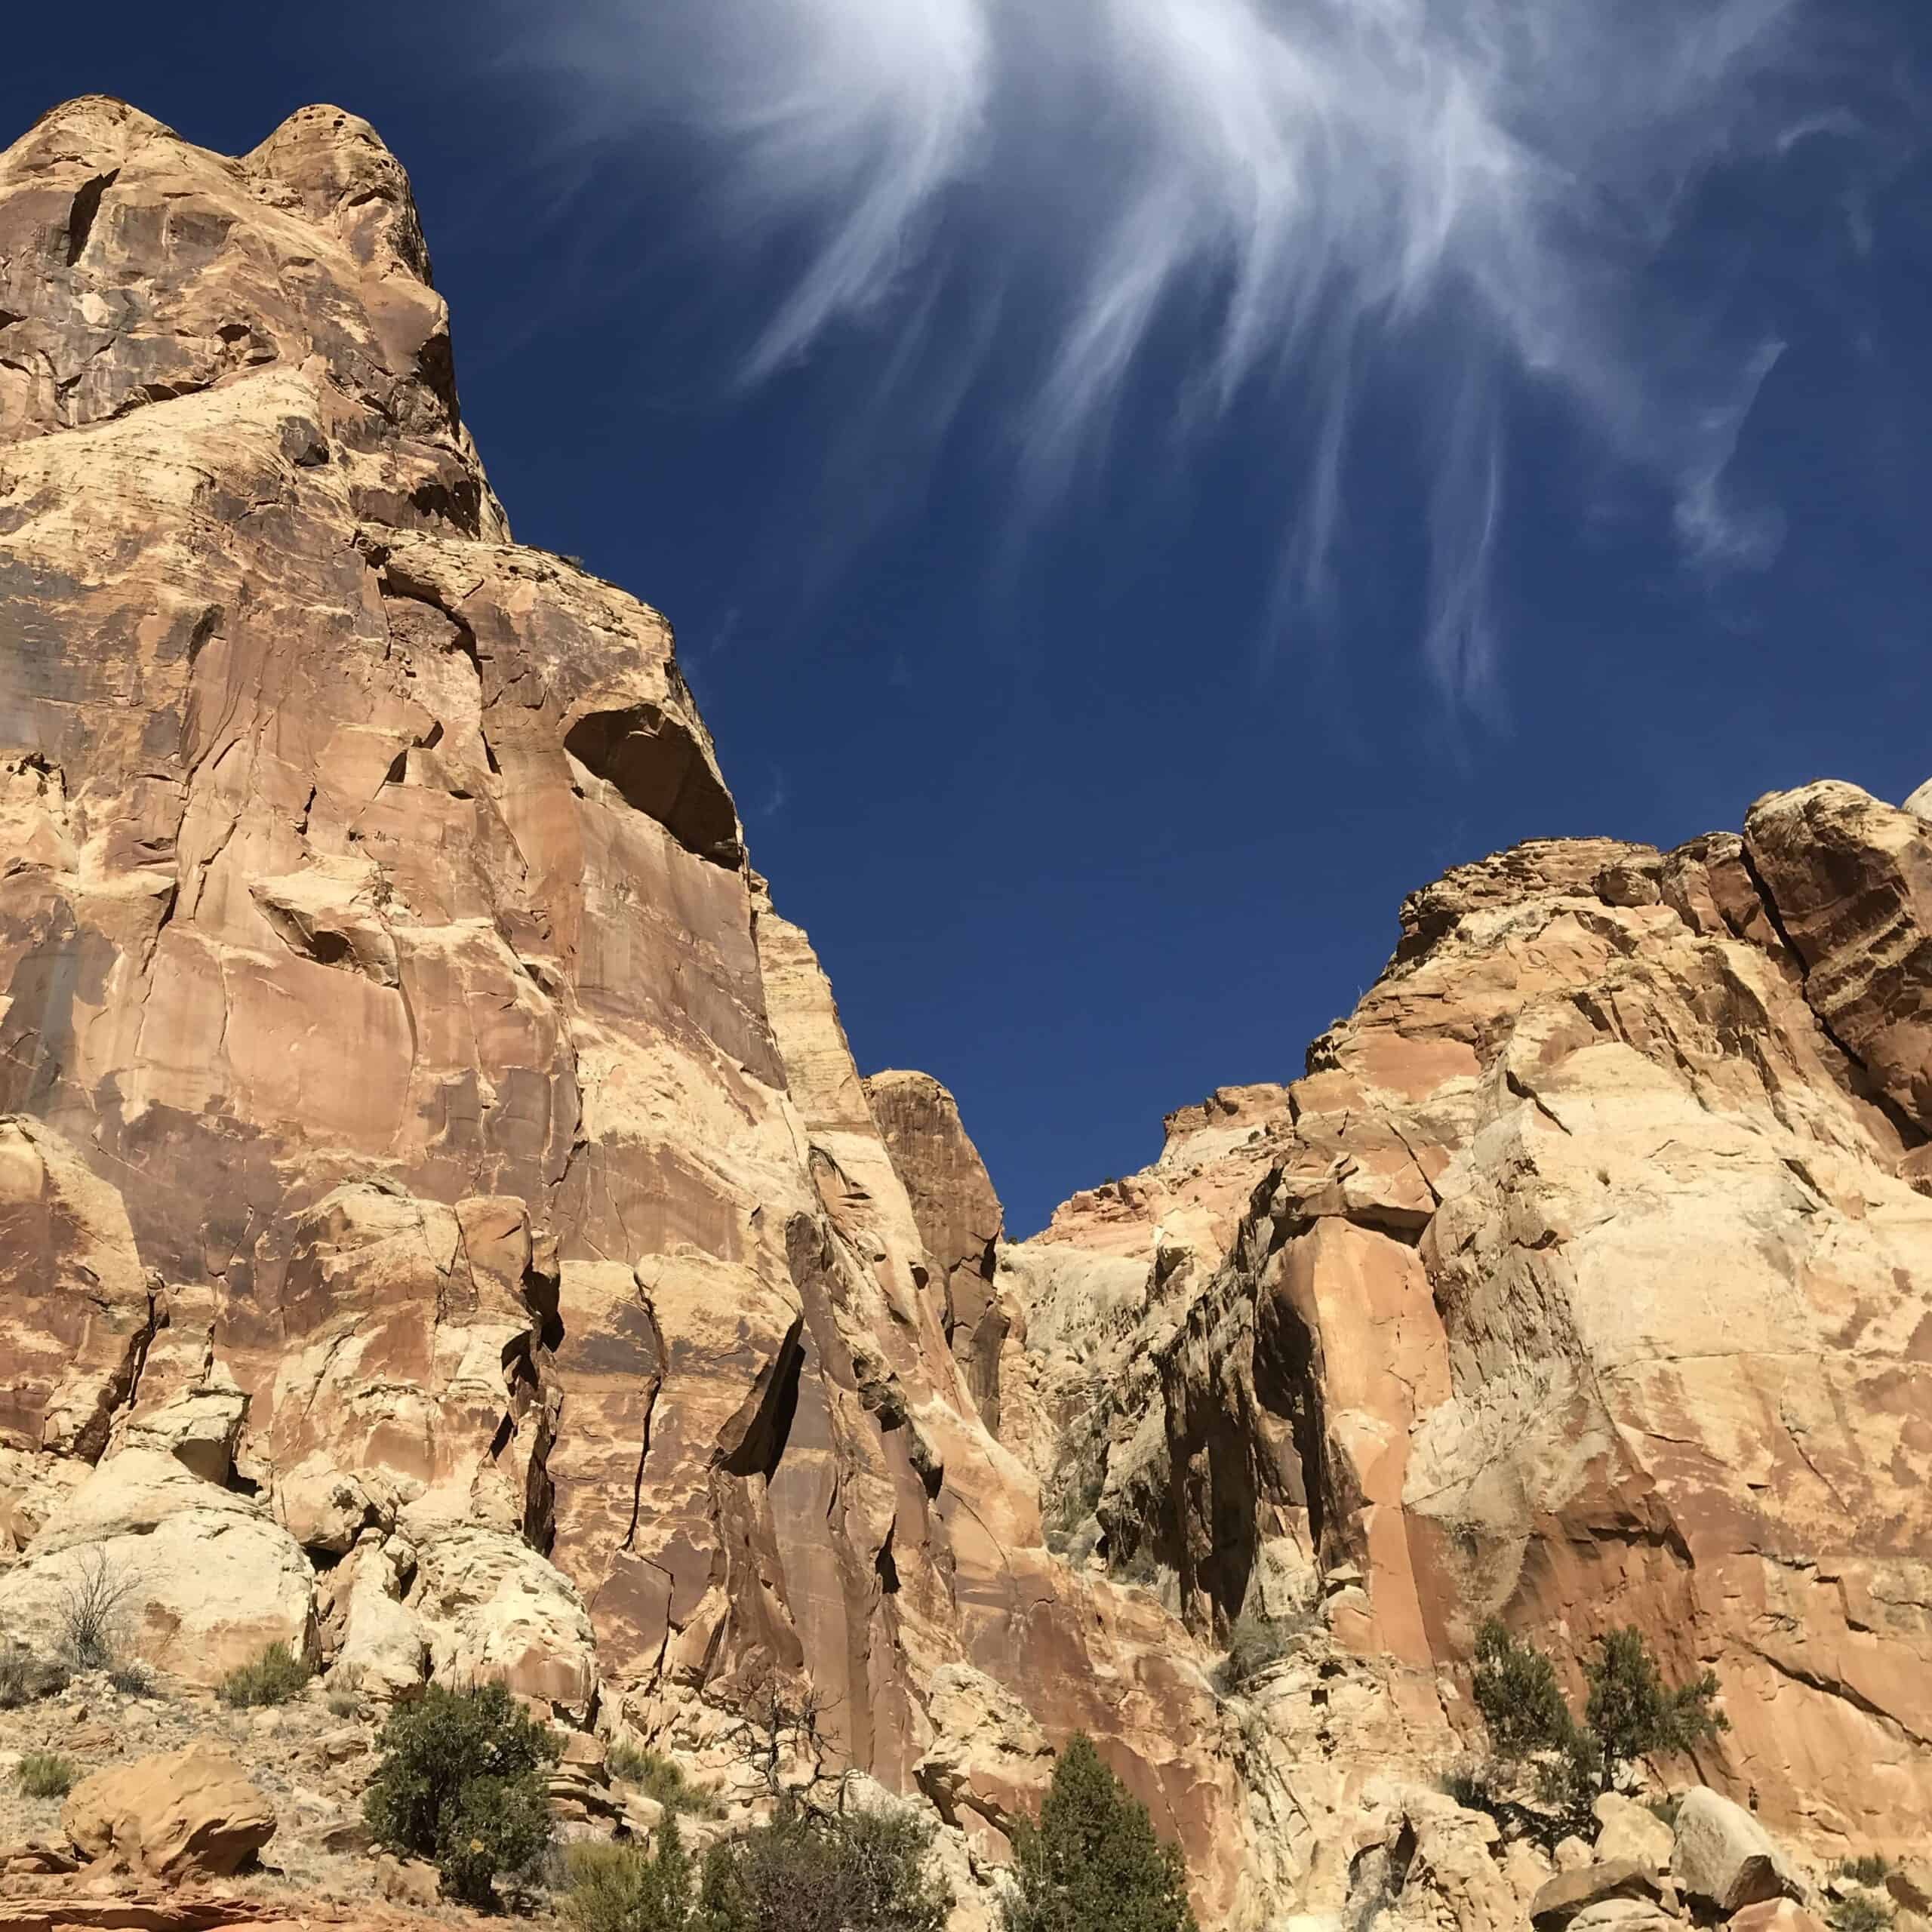 What is the National Park with the fewest crowds? This photo depicts a blue sky and rock cliffs on a quiet day at Capitol Reef.